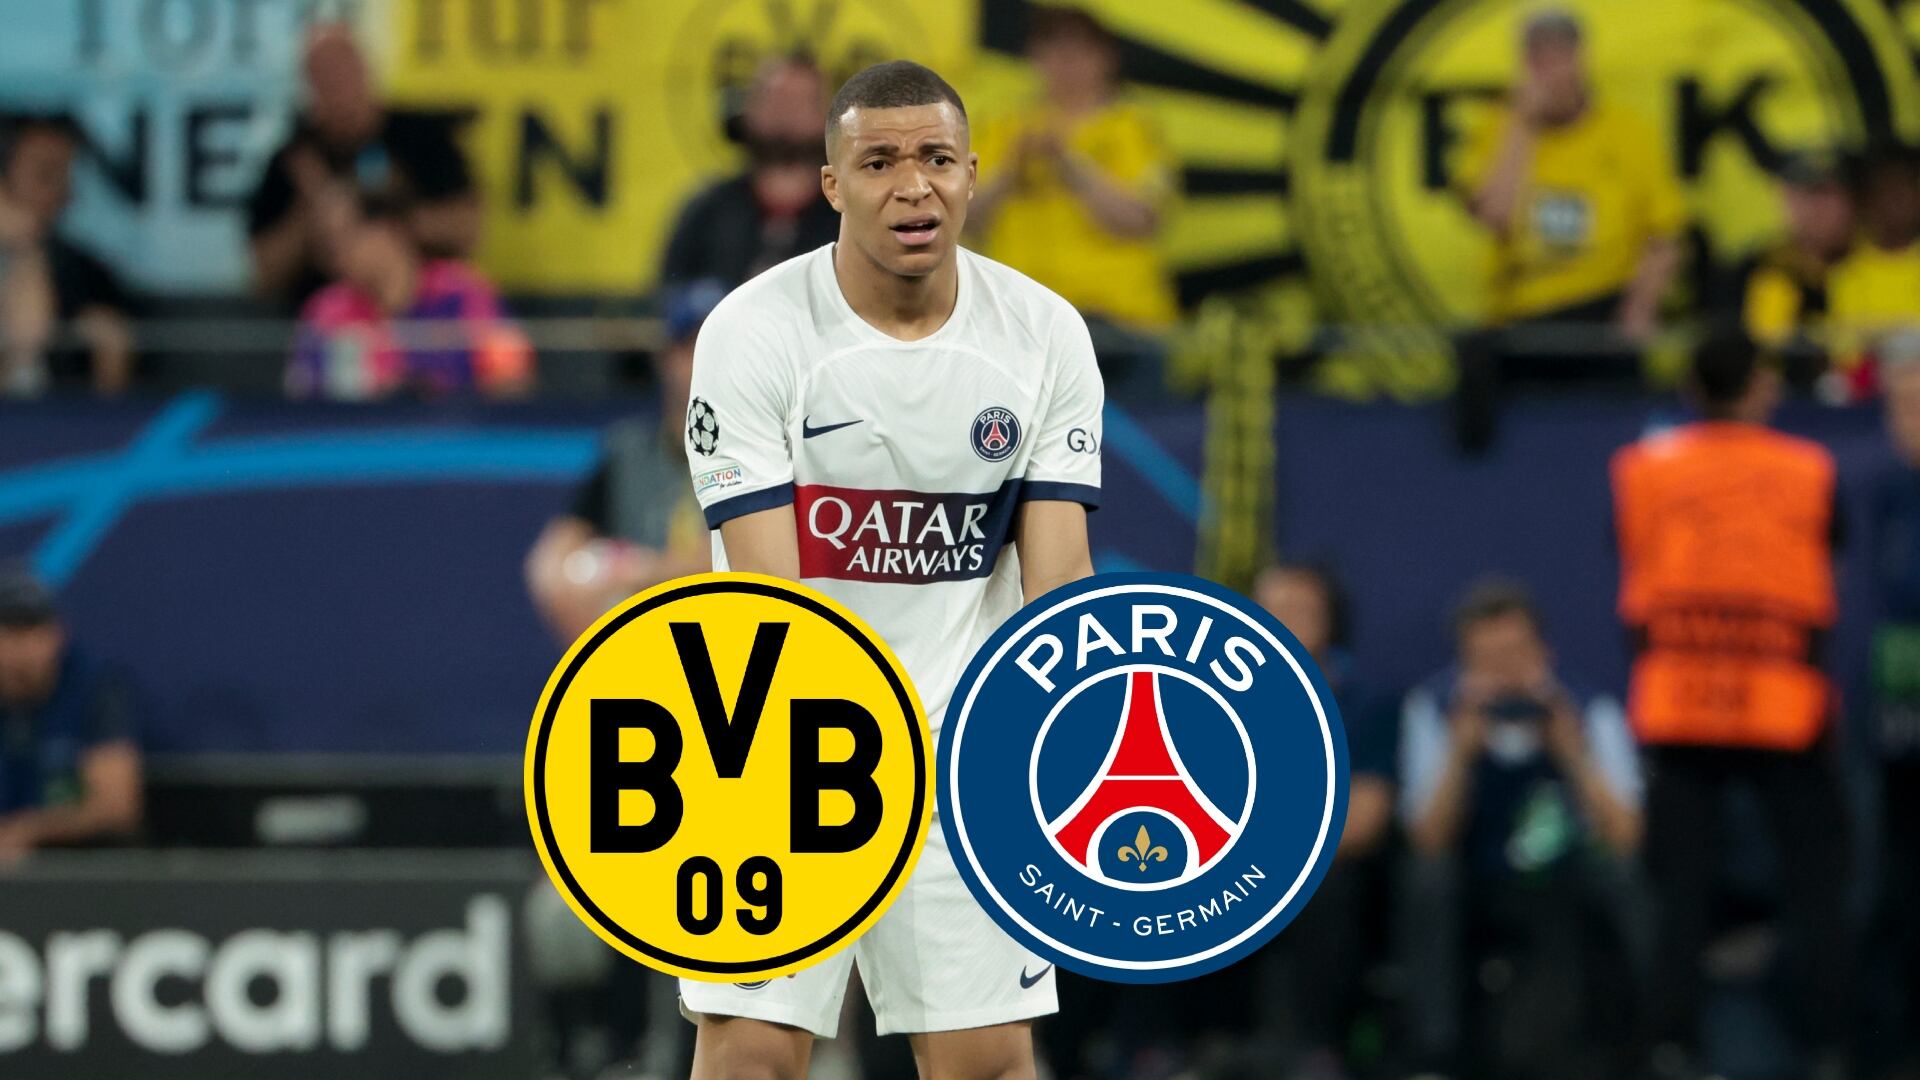 What PSG had to do with Mbappé after his poor game in Champions League that surely bothered Kylian